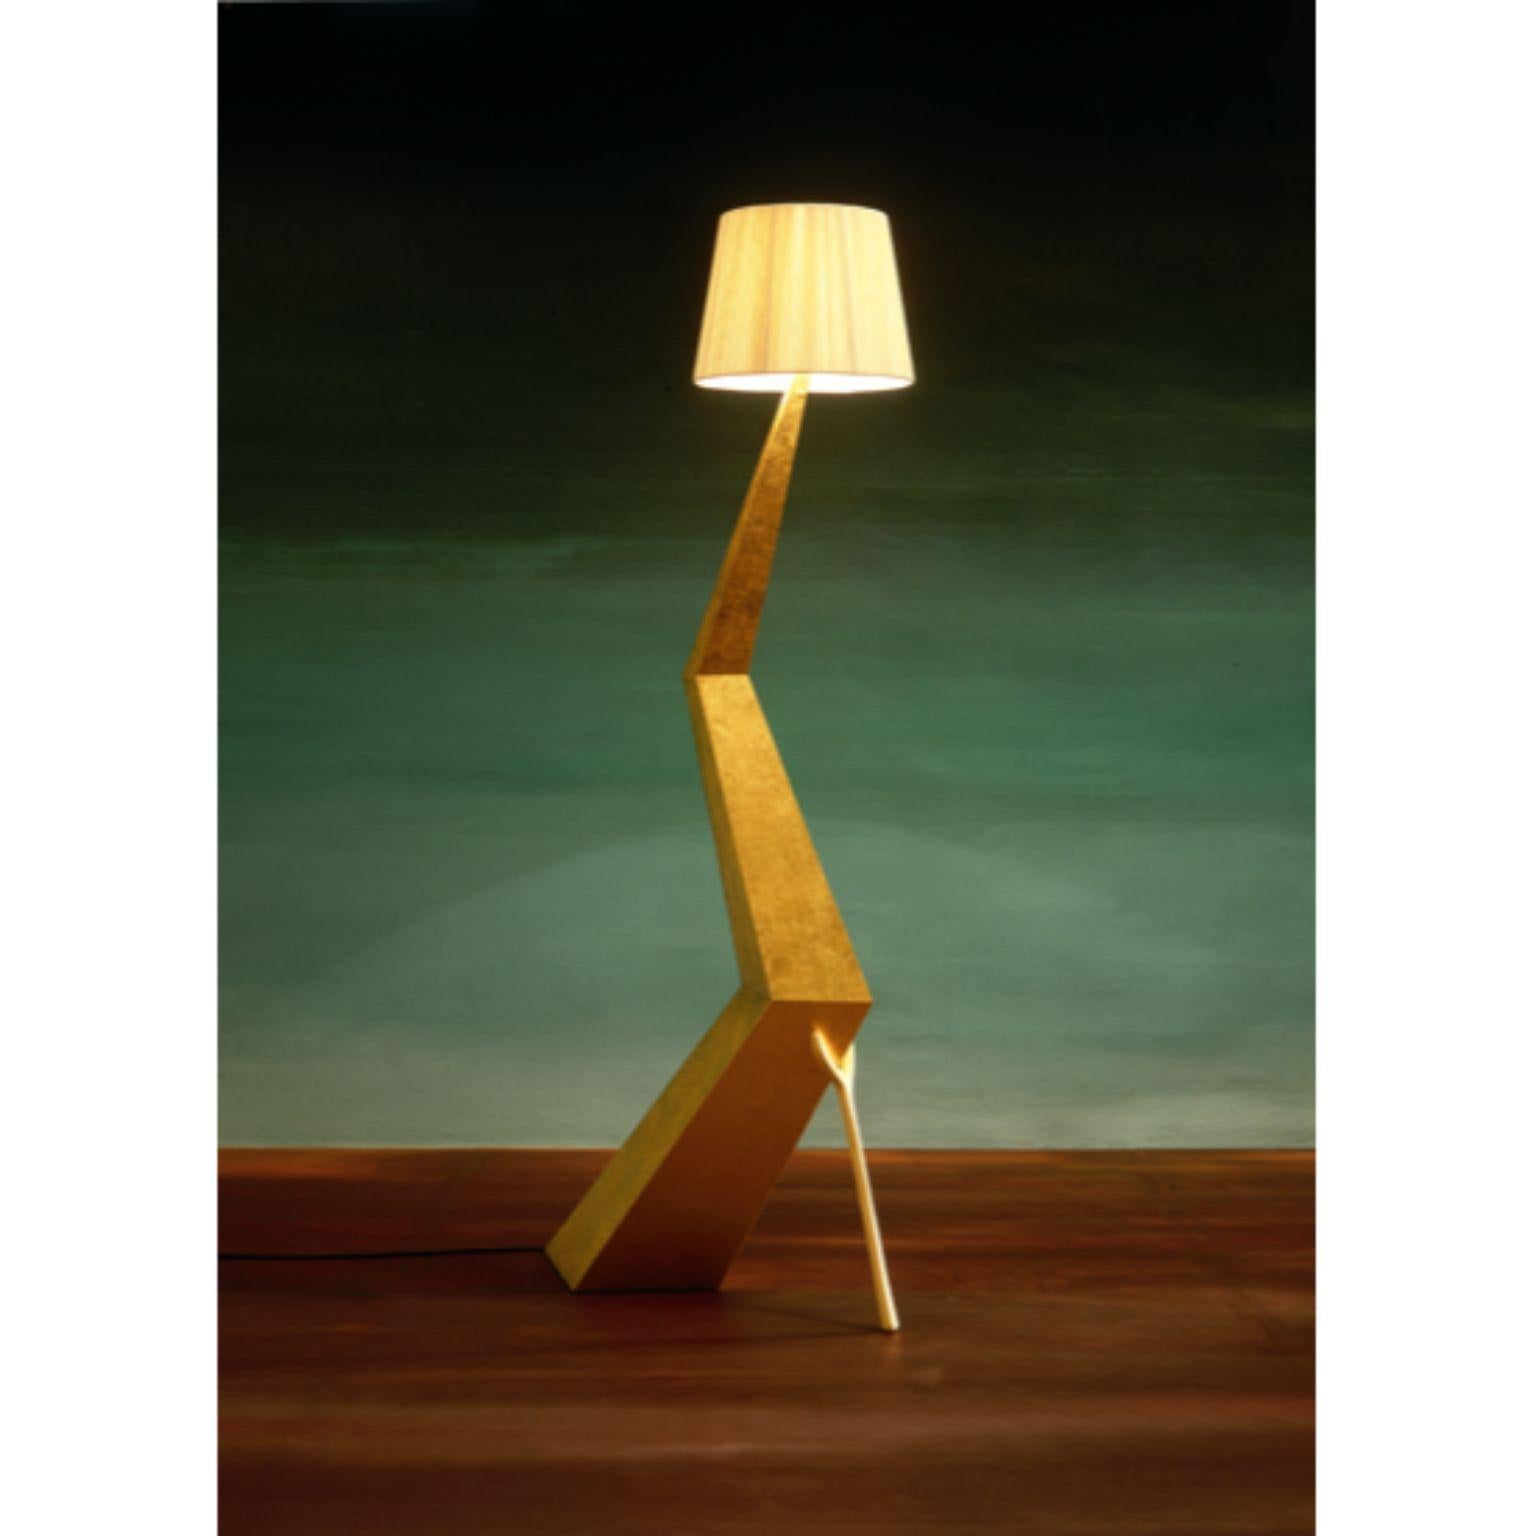 Bracelli lamp, Salvador Dalí
Dimensions: 64 x 37 x 180 H cm
Materials: Wooden board structure
Ivory colored cotton and rayon fabric

The Bracelli lamp has a wooden board structure covered in fine gilding also available in a darker version. The